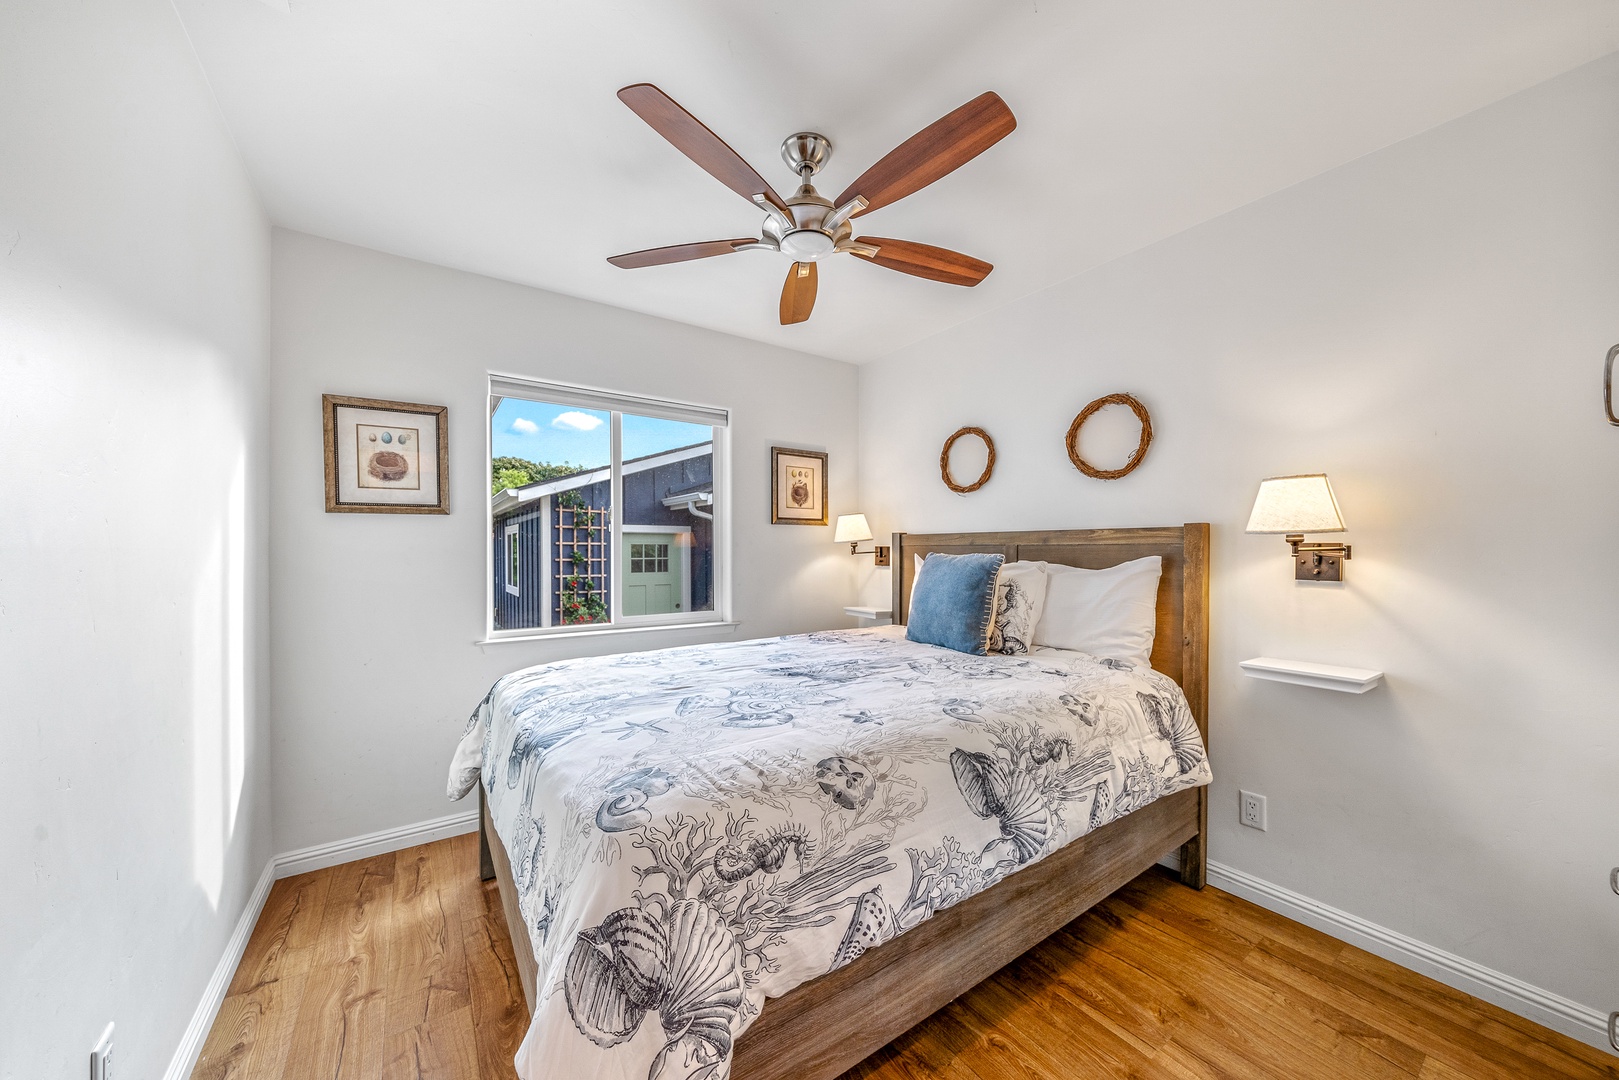 The 1st of 2 bedrooms offers a comfy queen bed & ceiling fan